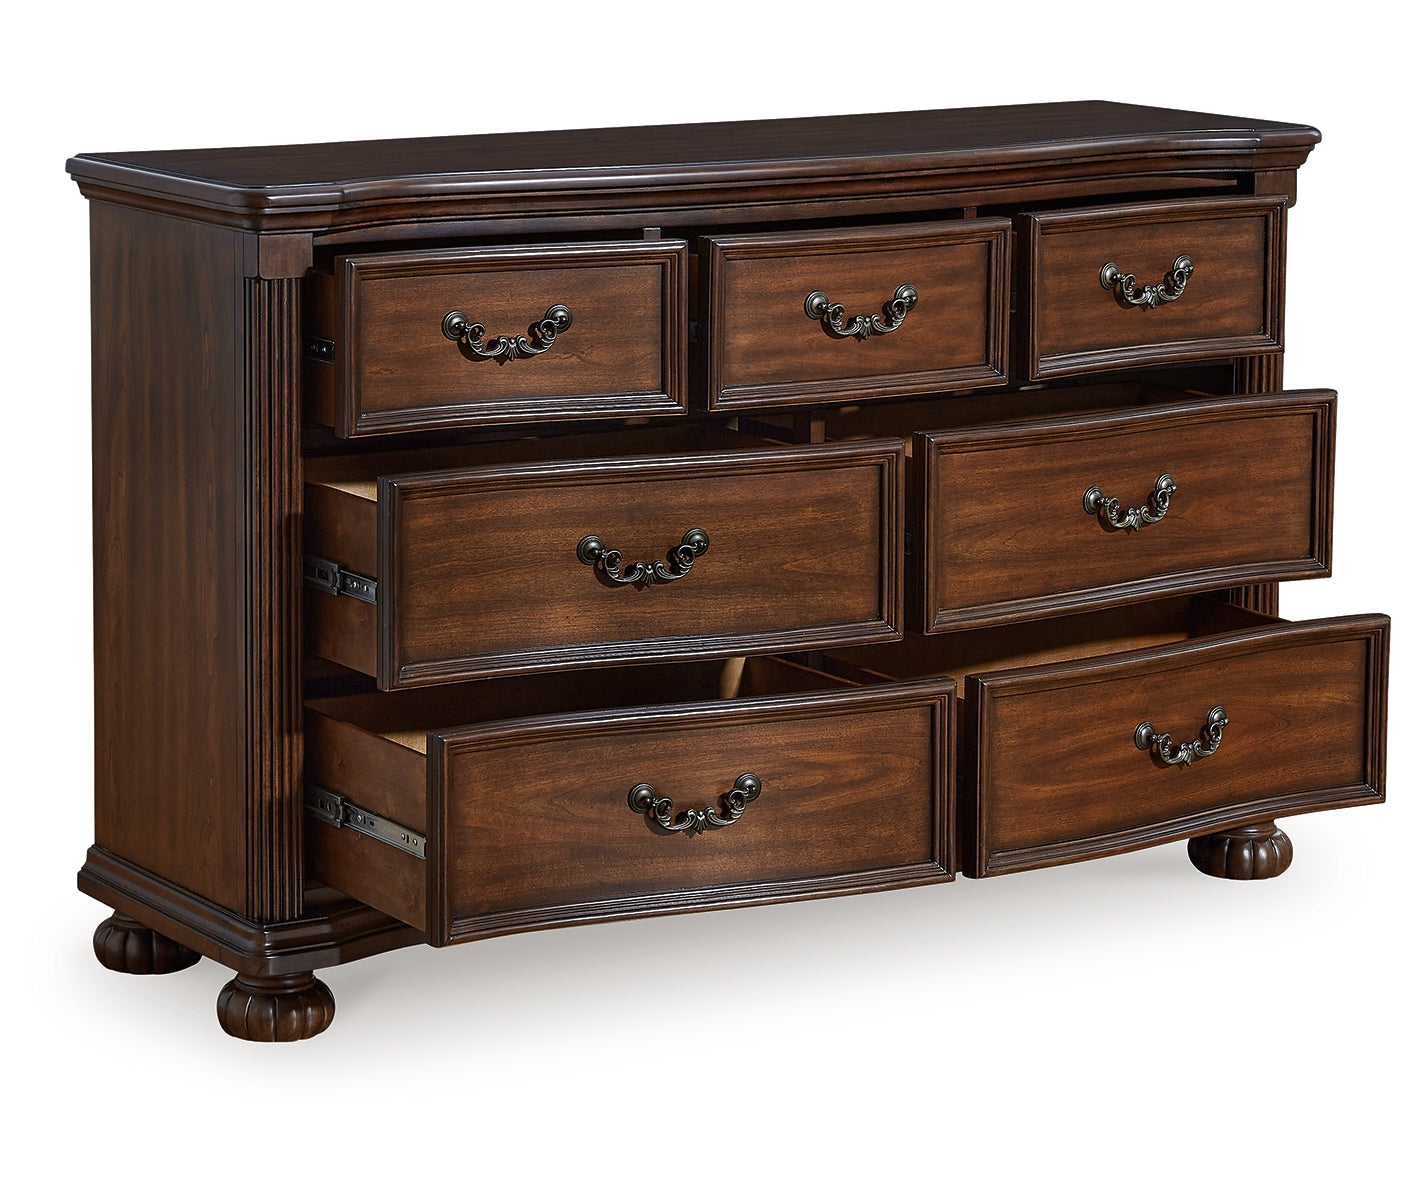 Lavinton Queen Poster Bed with Dresser